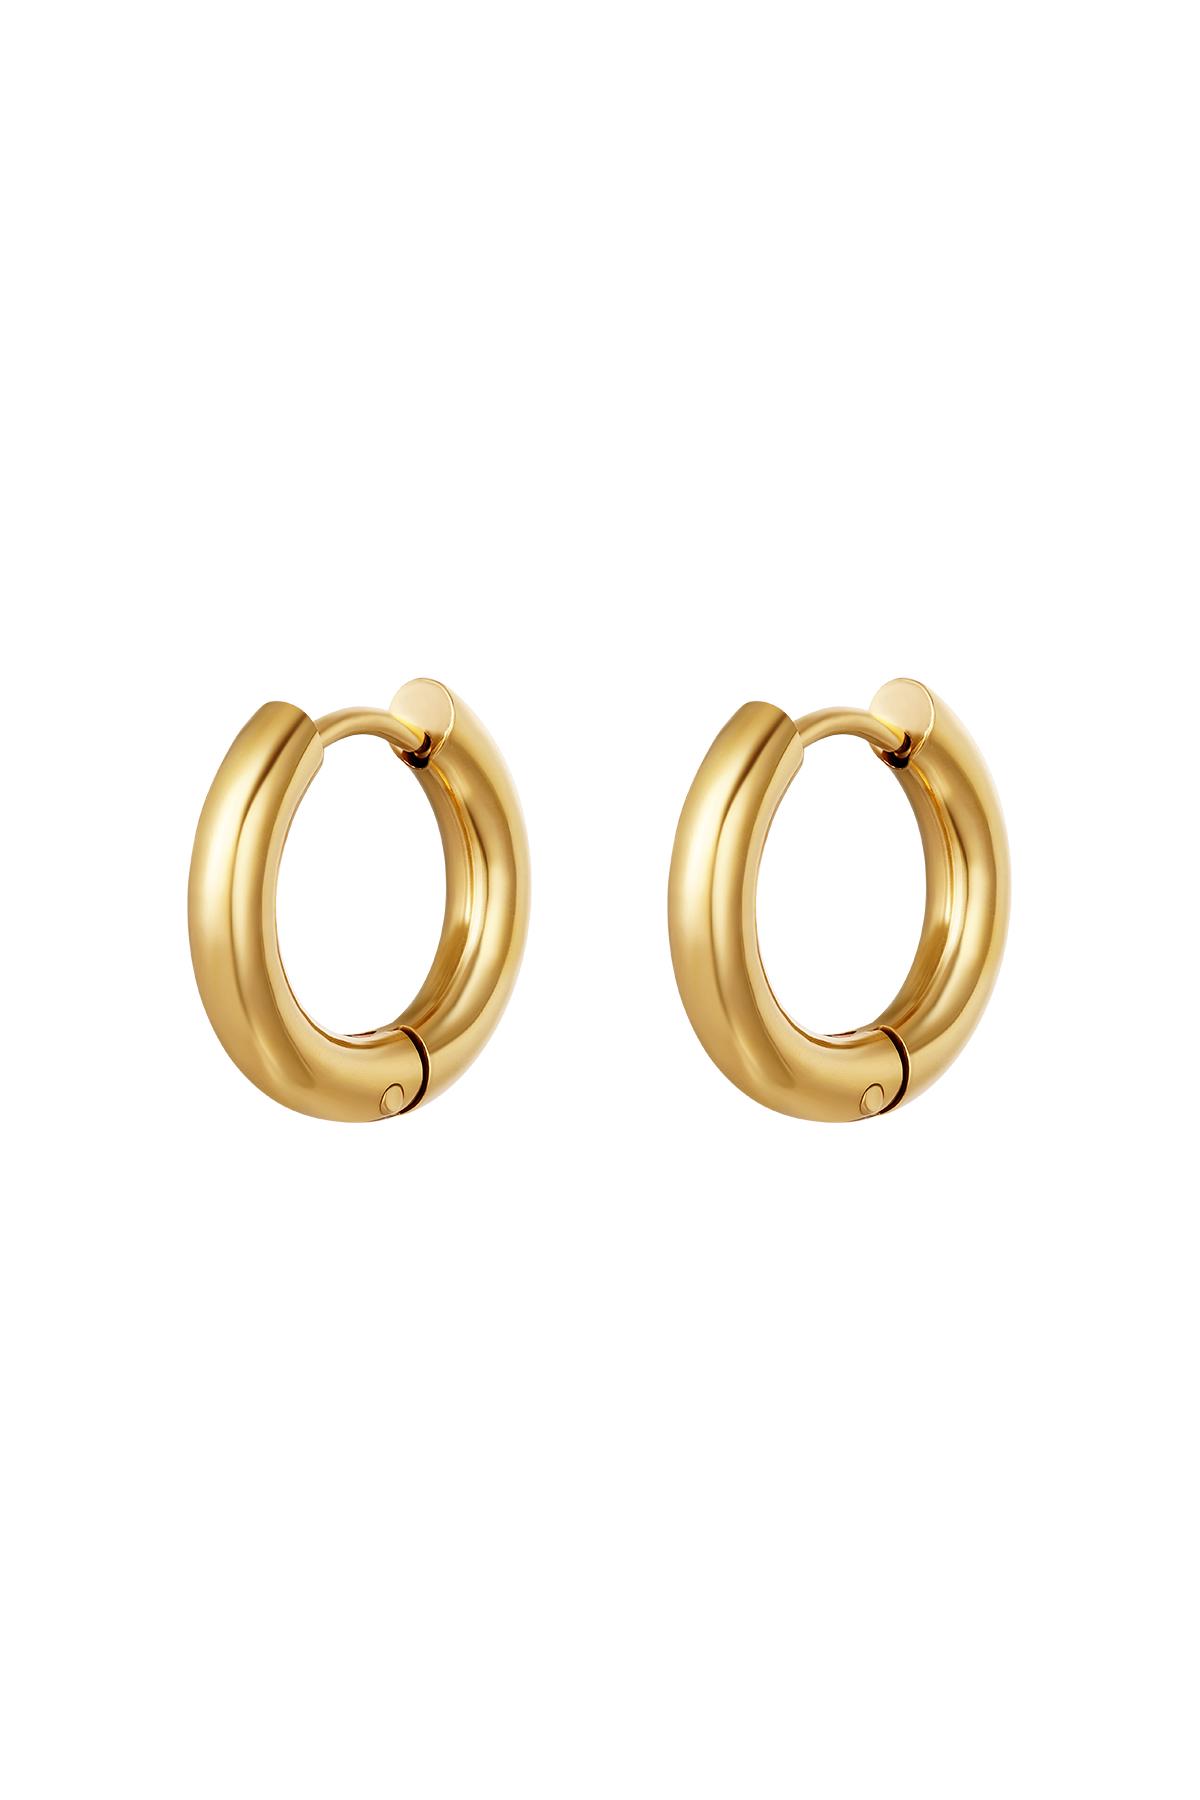 Basic creoles earrings - small Gold Stainless Steel h5 